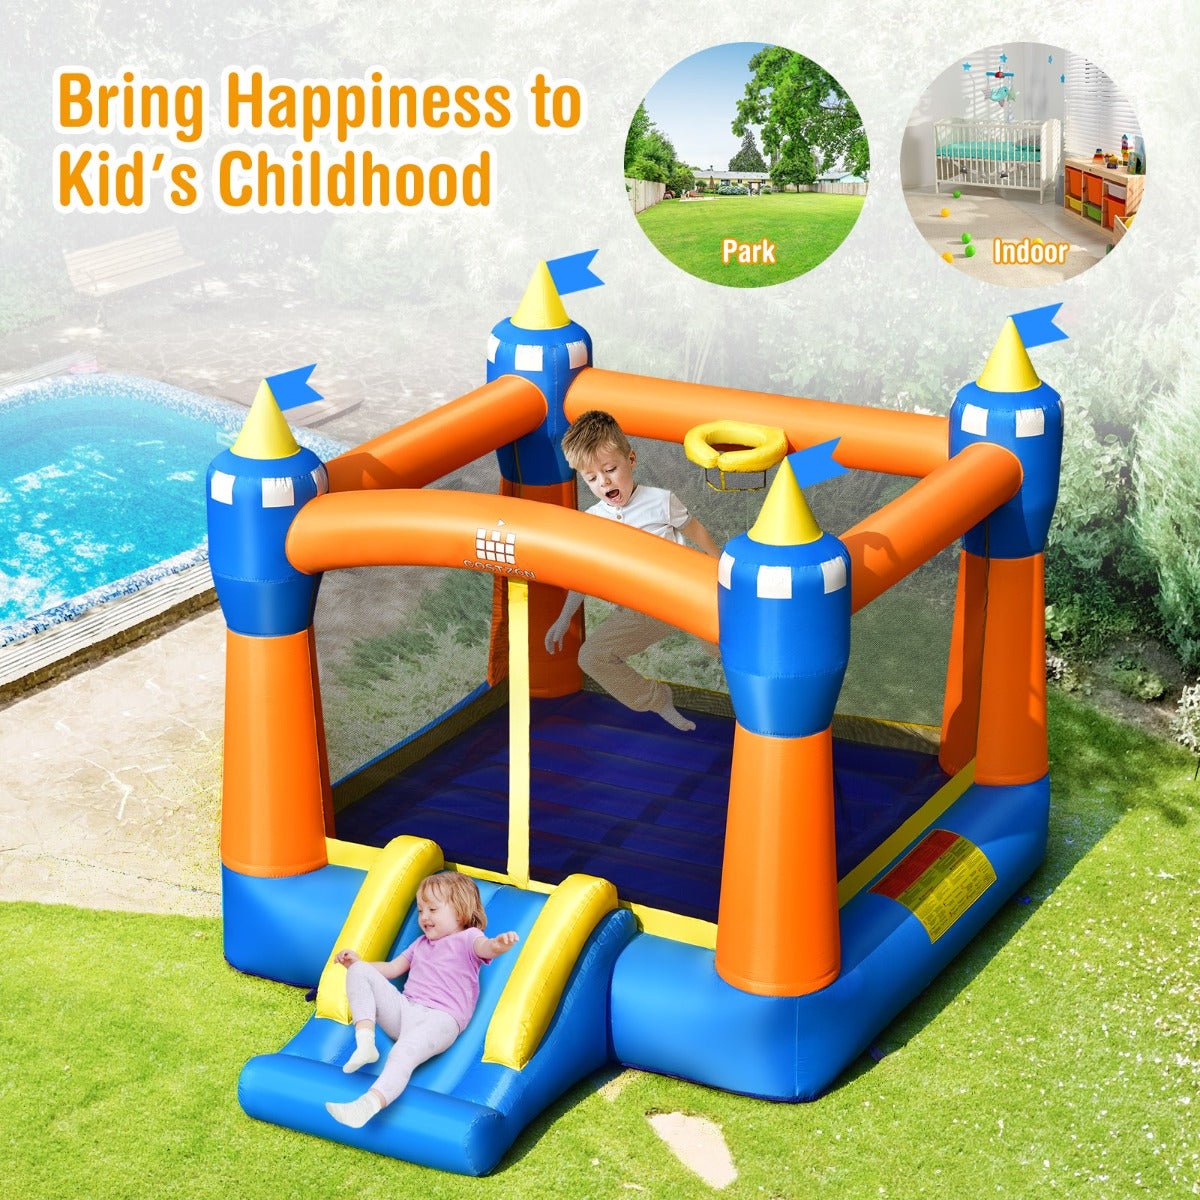 Kids Castle Bounce House - Jump, Play, and Imagine